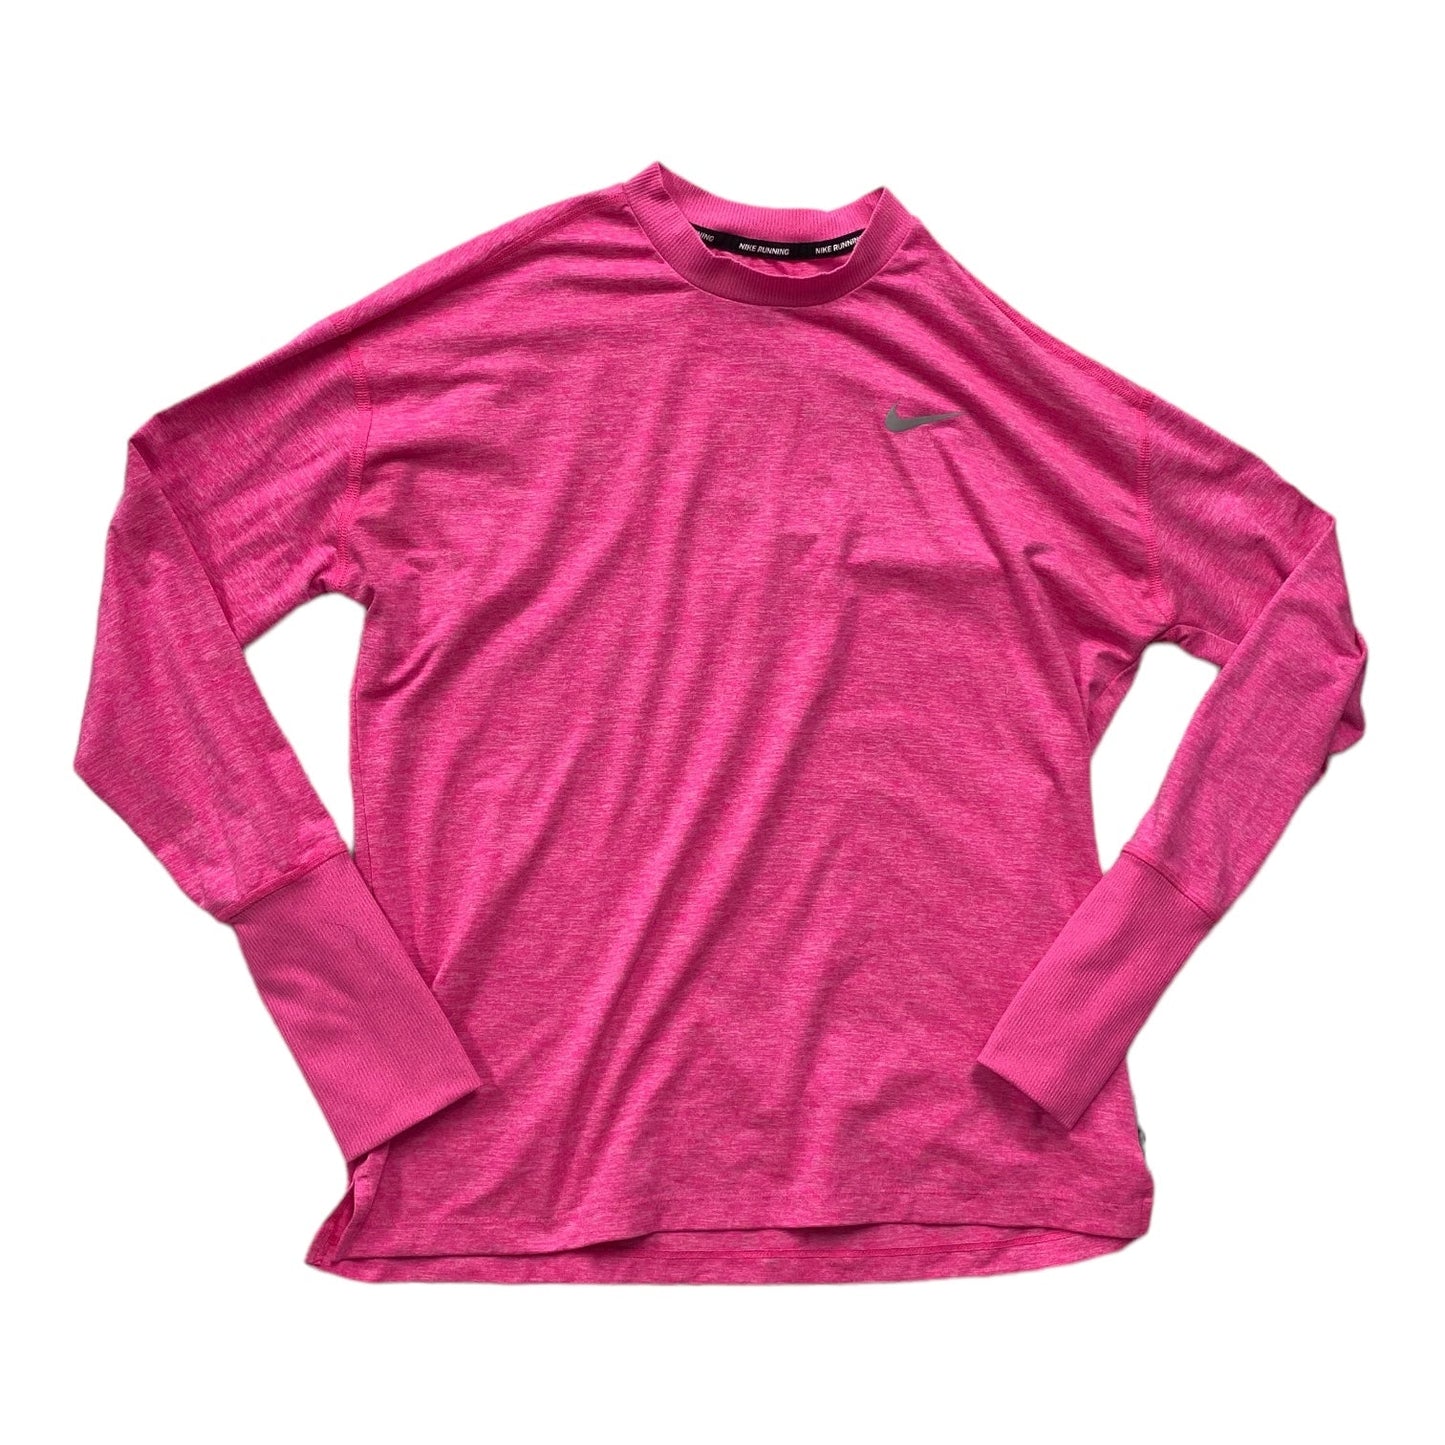 Pink Athletic Top Long Sleeve Crewneck Nike, Size M